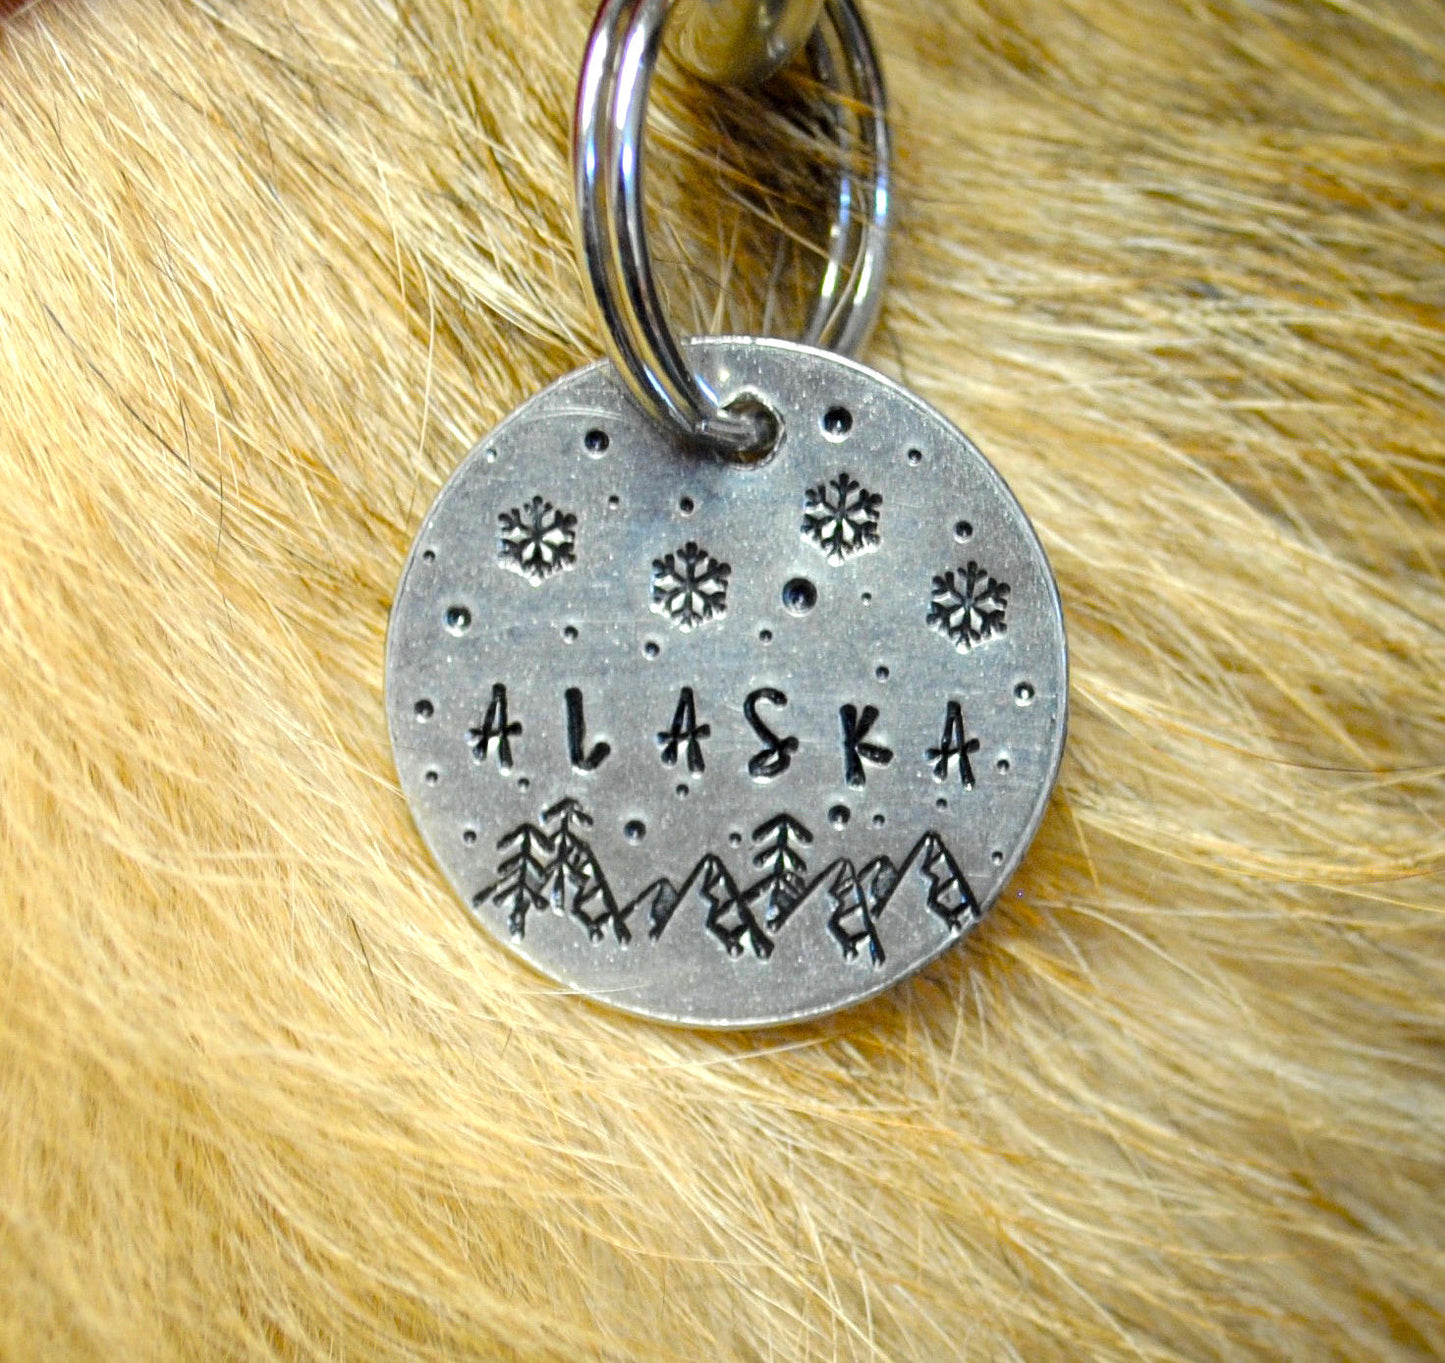 Snowflakes and Mountains Design Engraved Dog Tag - Cat ID Tag - Dog Collar Tag - Custom Dog Tag - Personalized Tag - Pet ID Tag - Pet Name Tag - Serpent - Engraved Metal - Engraved Design - Snow - Mountains - Metal Working